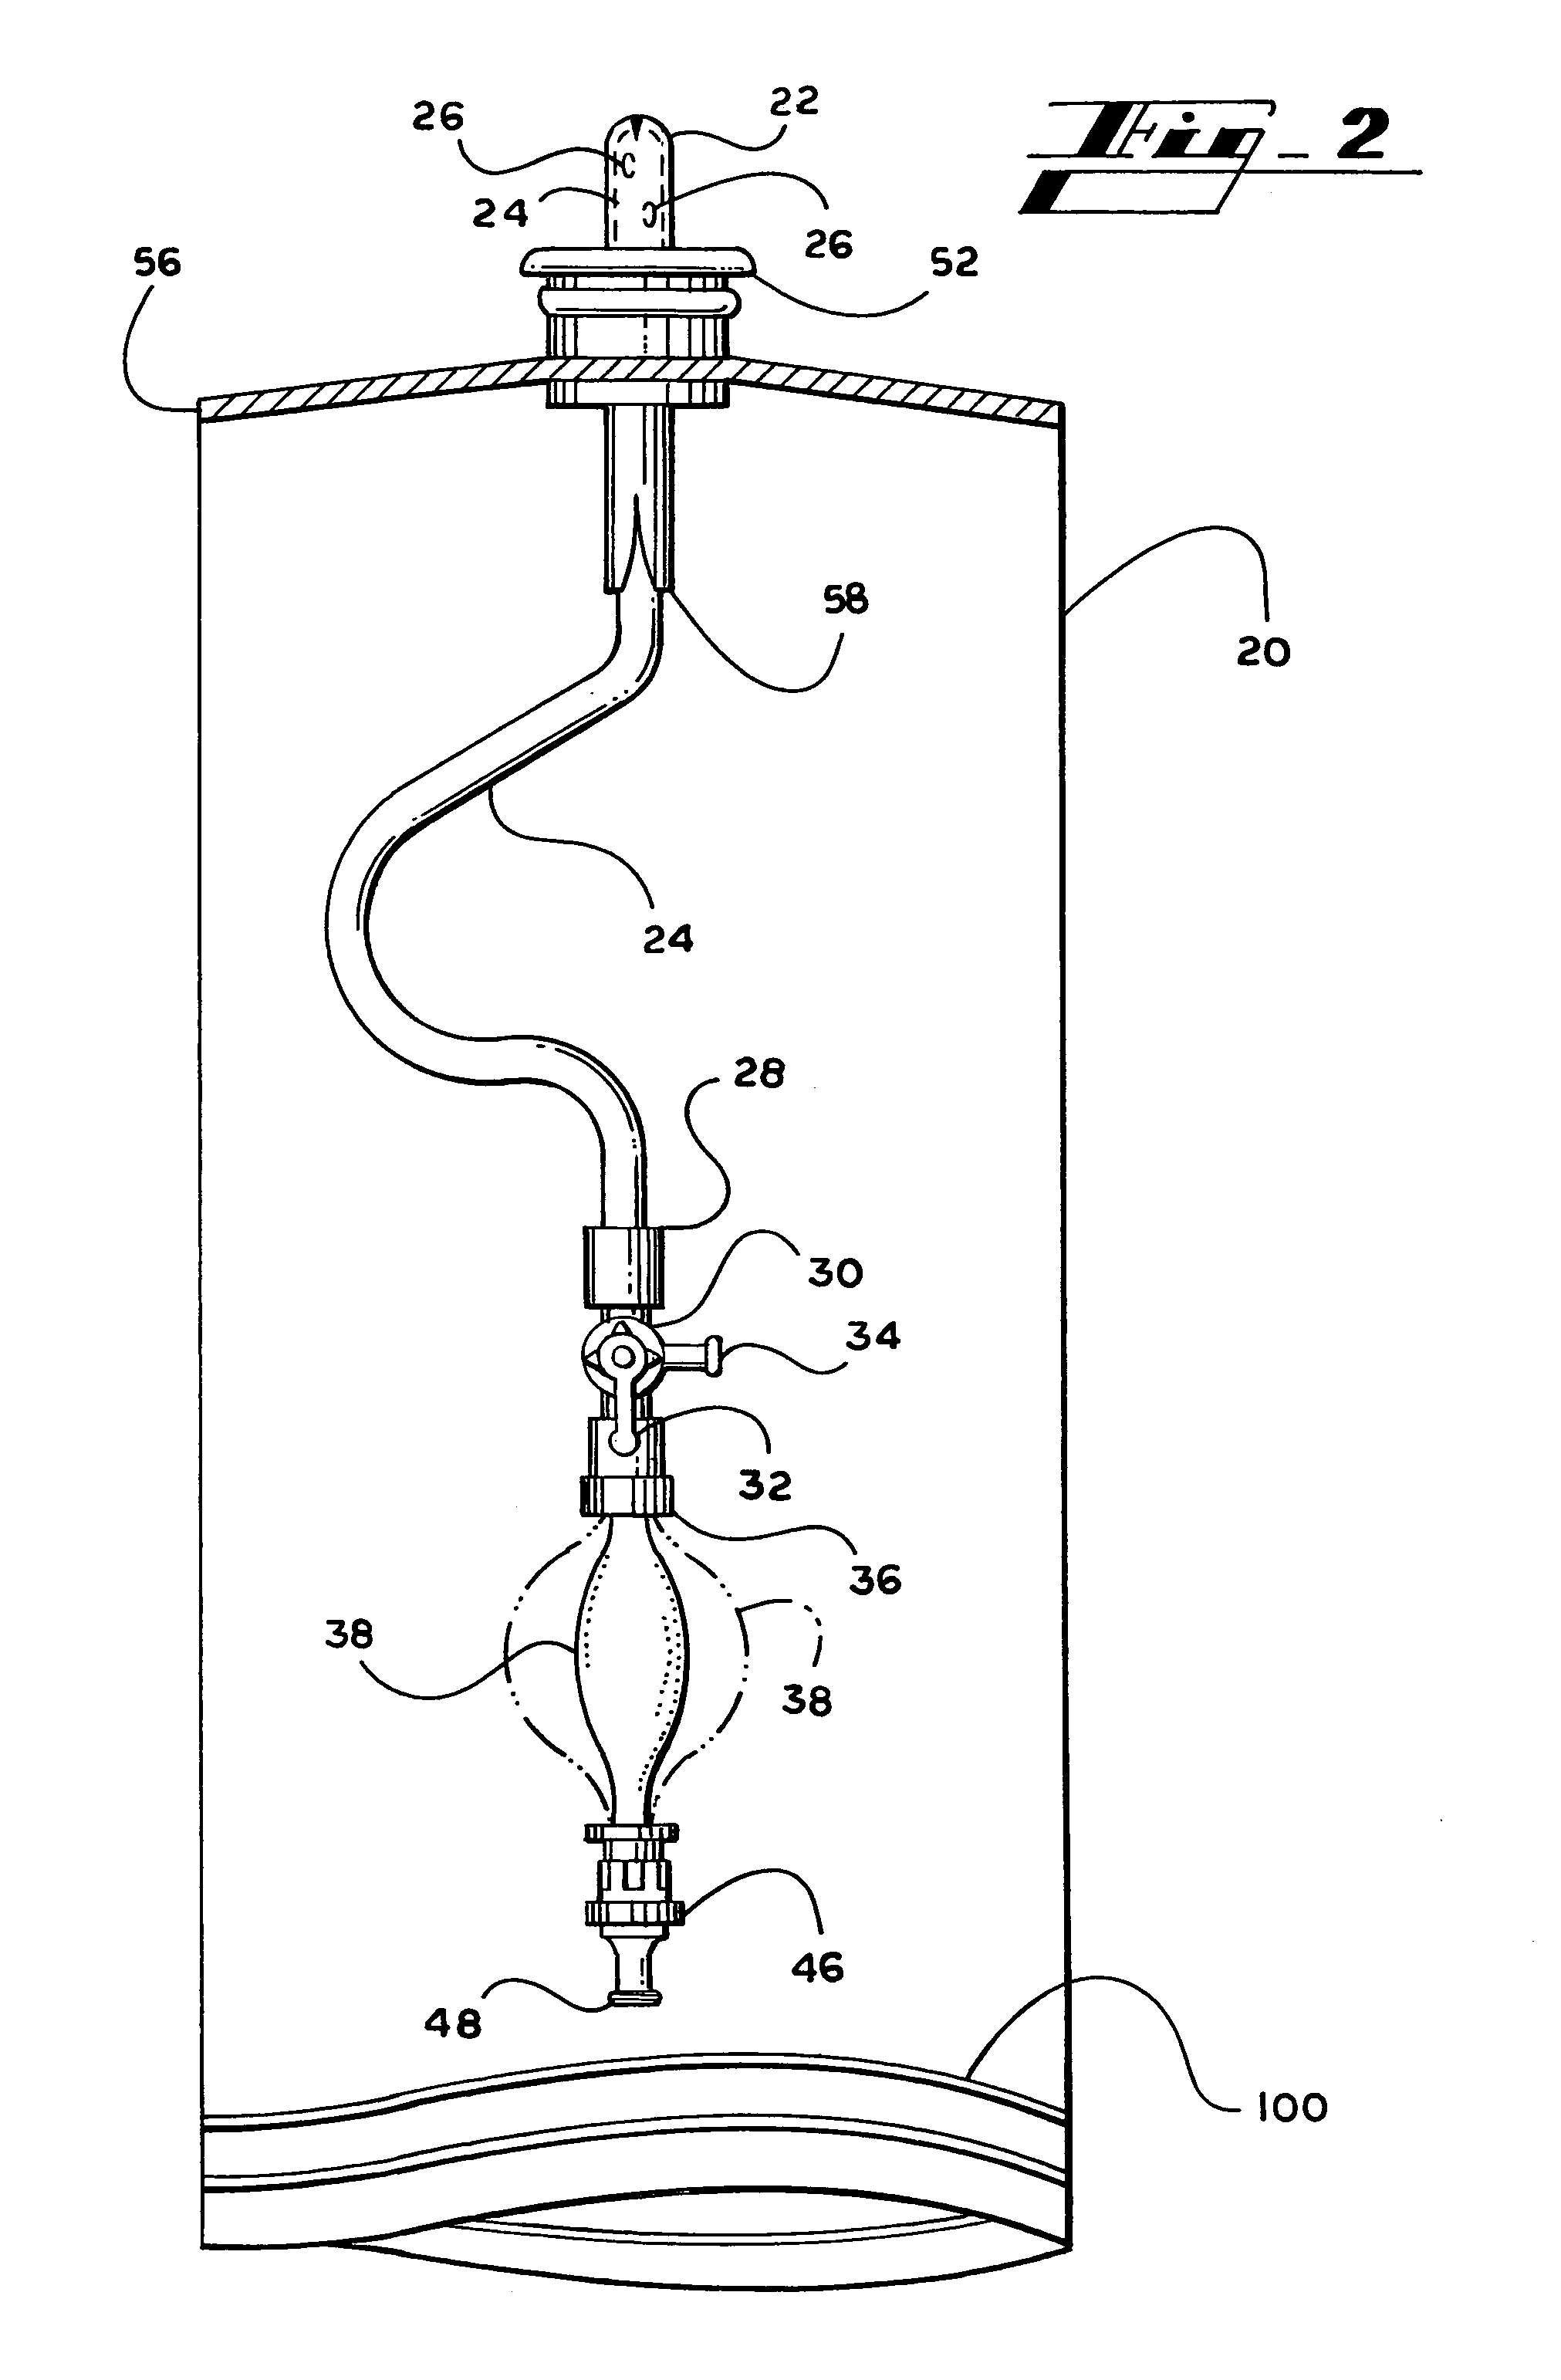 Catheter system and method for delivering medication to the bladder